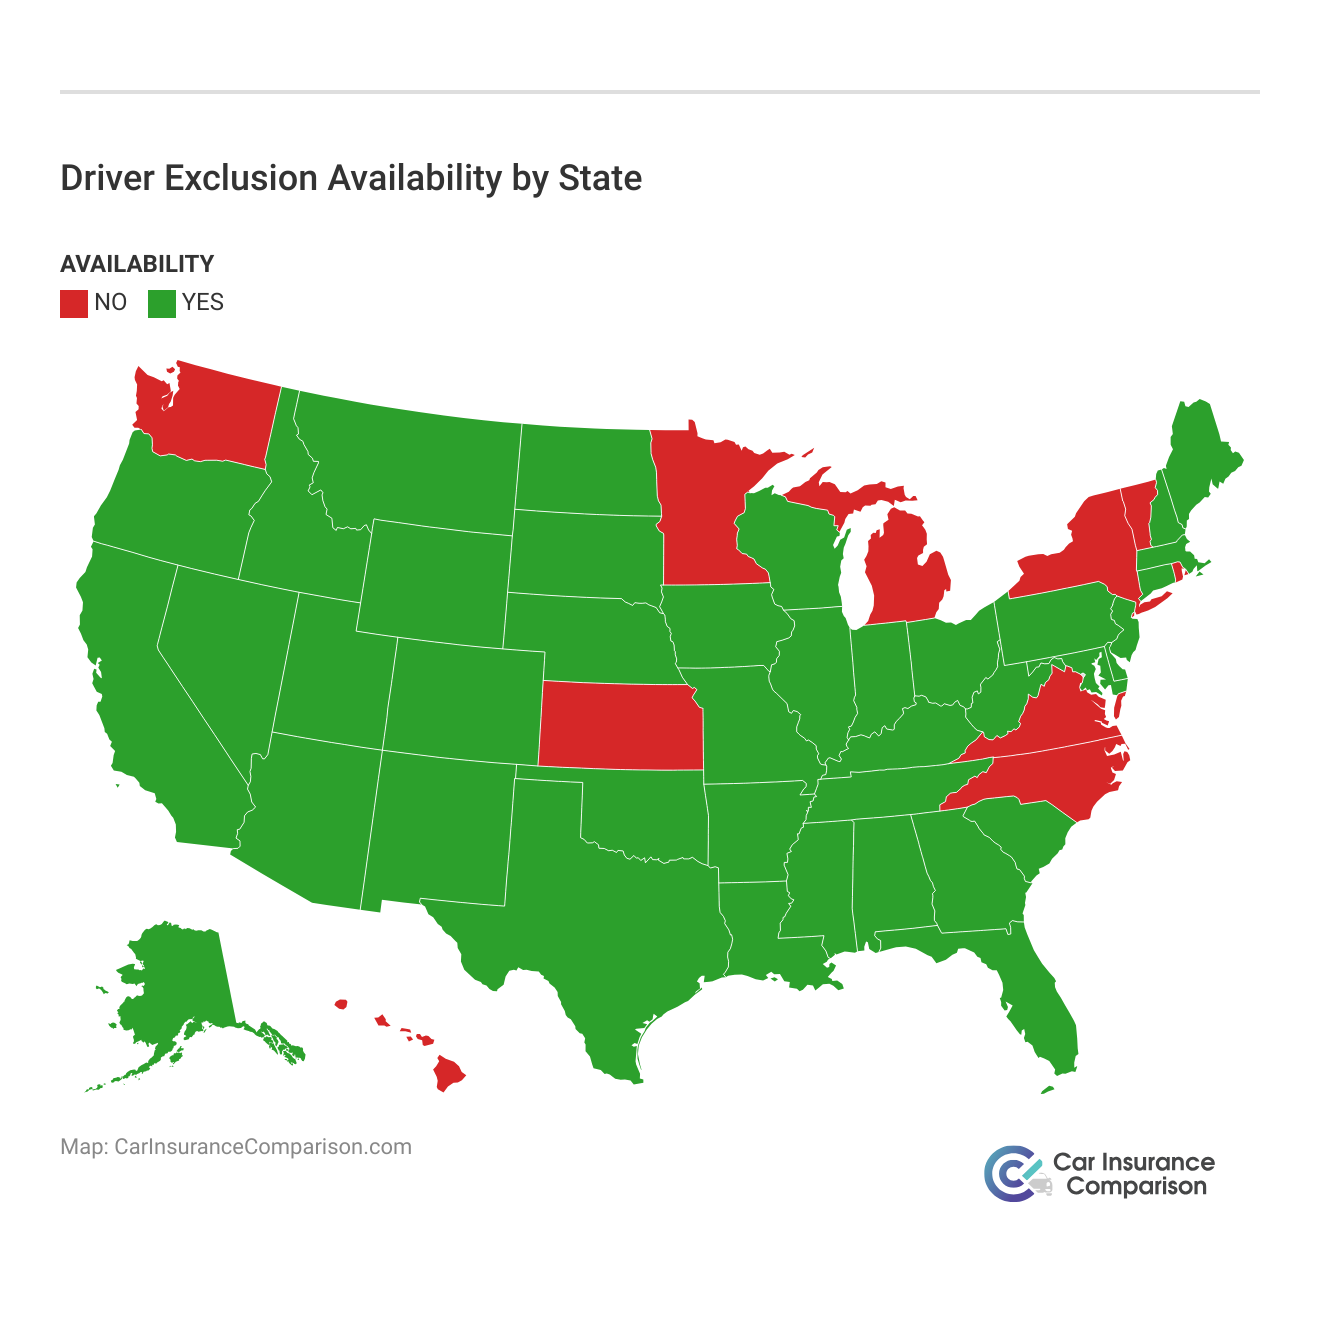 <h3>Driver Exclusion Availability by State</h3>